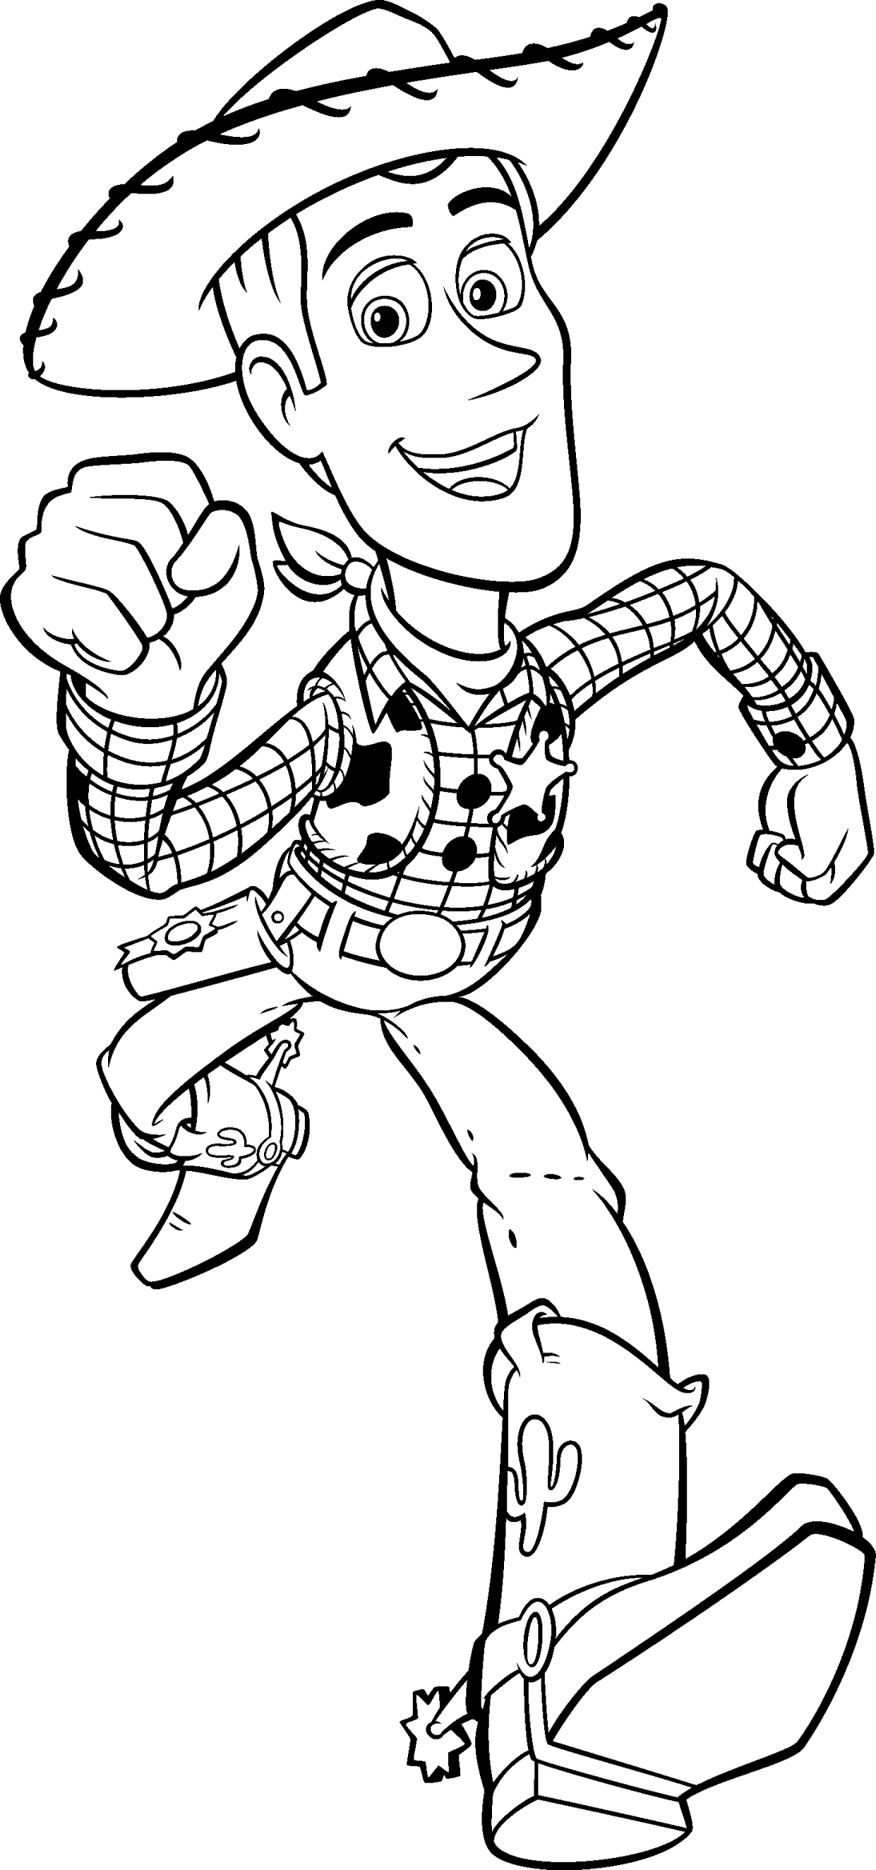 Download Free Printable Toy Story Coloring Pages For Kids